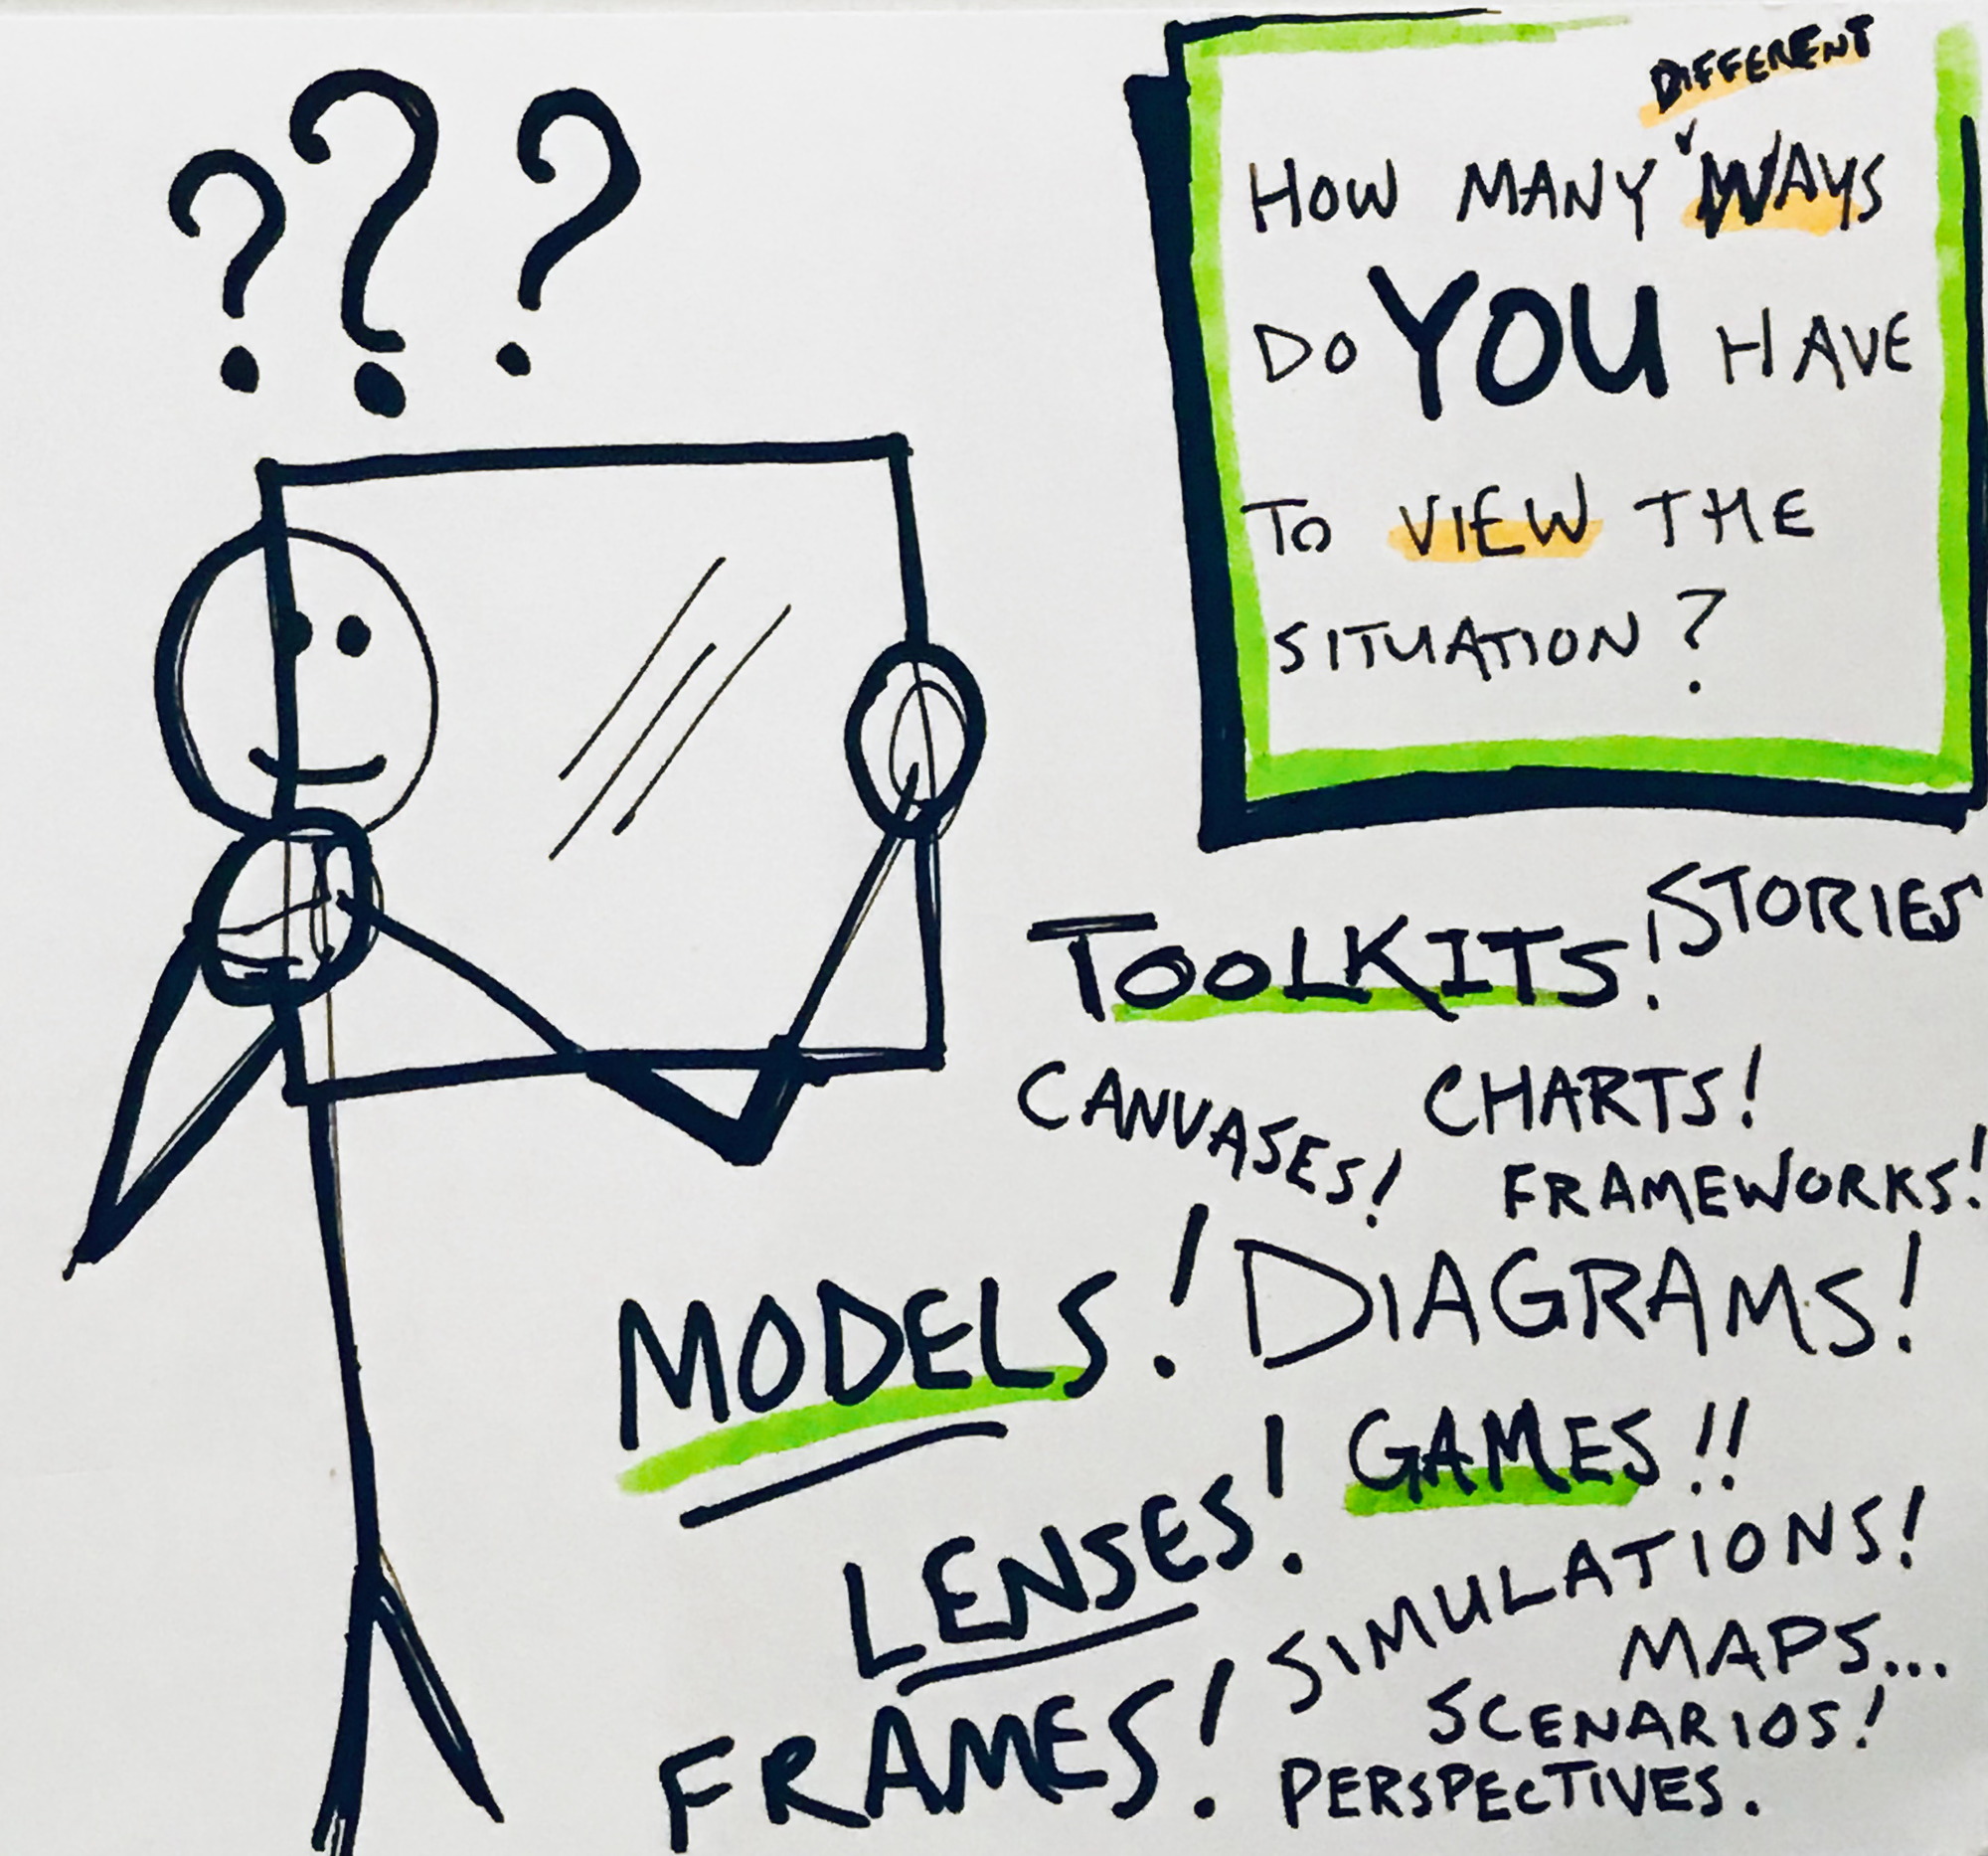 Sketch of a stick note person looking through what resemble a sheet of glass.Text reads: "How many different ways do you have to view the situation?" followed by a word cloud of the following words: "Toolkits. Stories. Charts. Canvases. Frameworks. Models. Diagrams. Games. Lenses. Frames. Simulations. Maps. Scenarios. Perspectives."